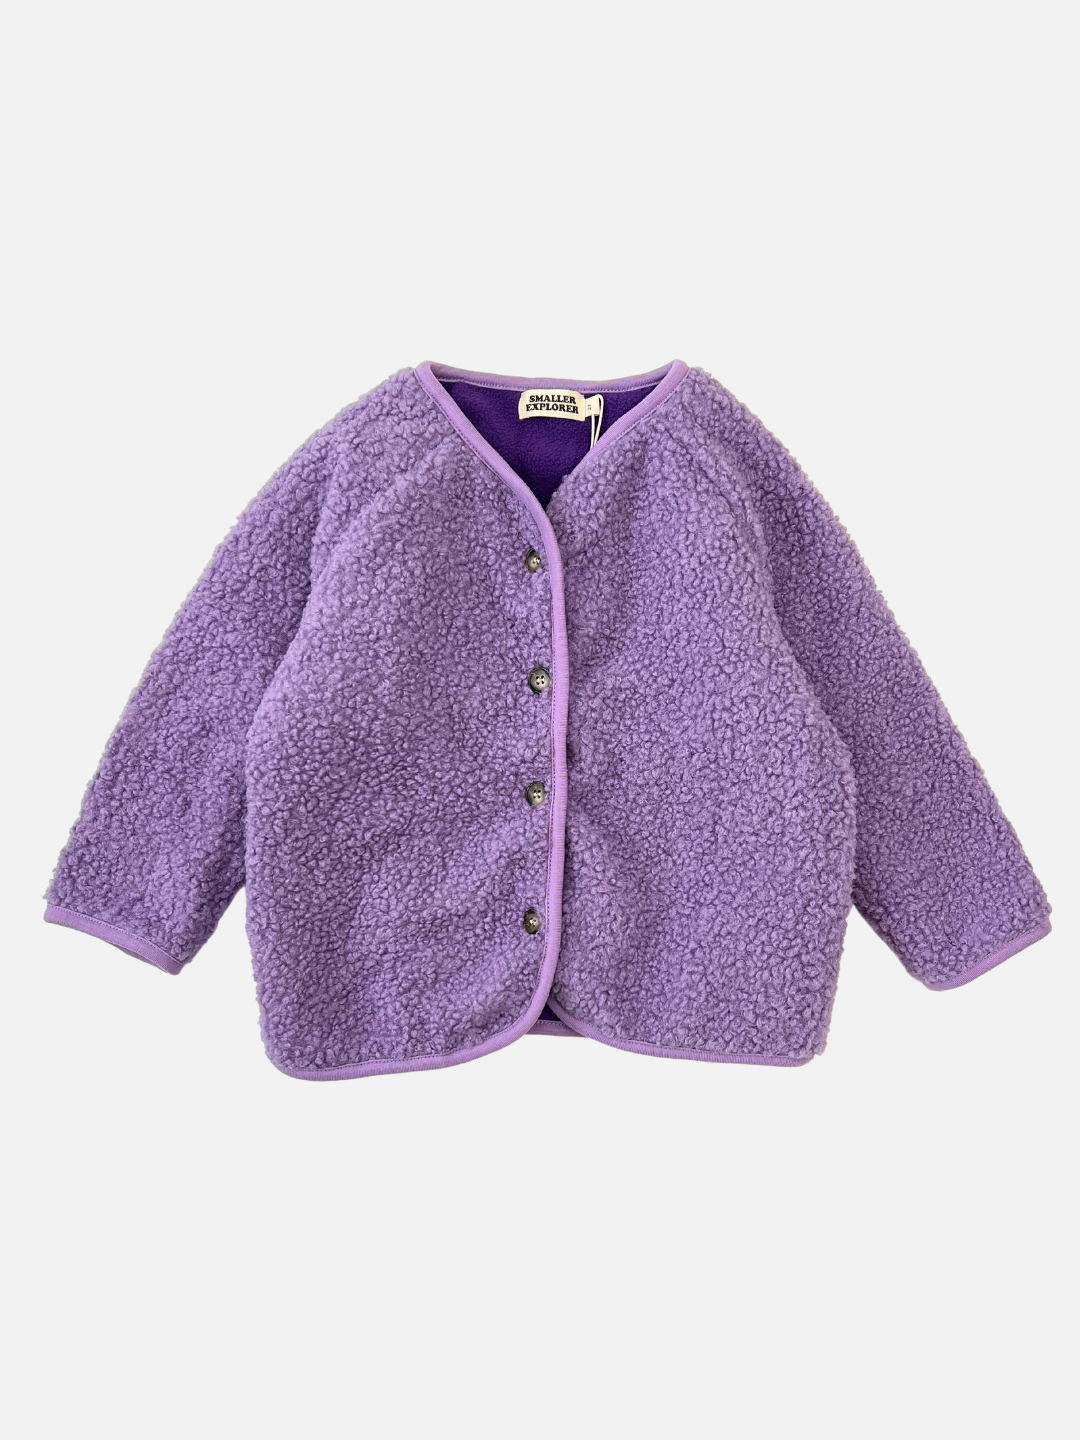 Front view of a kids purple collarless fleece jacket with four brown buttons.